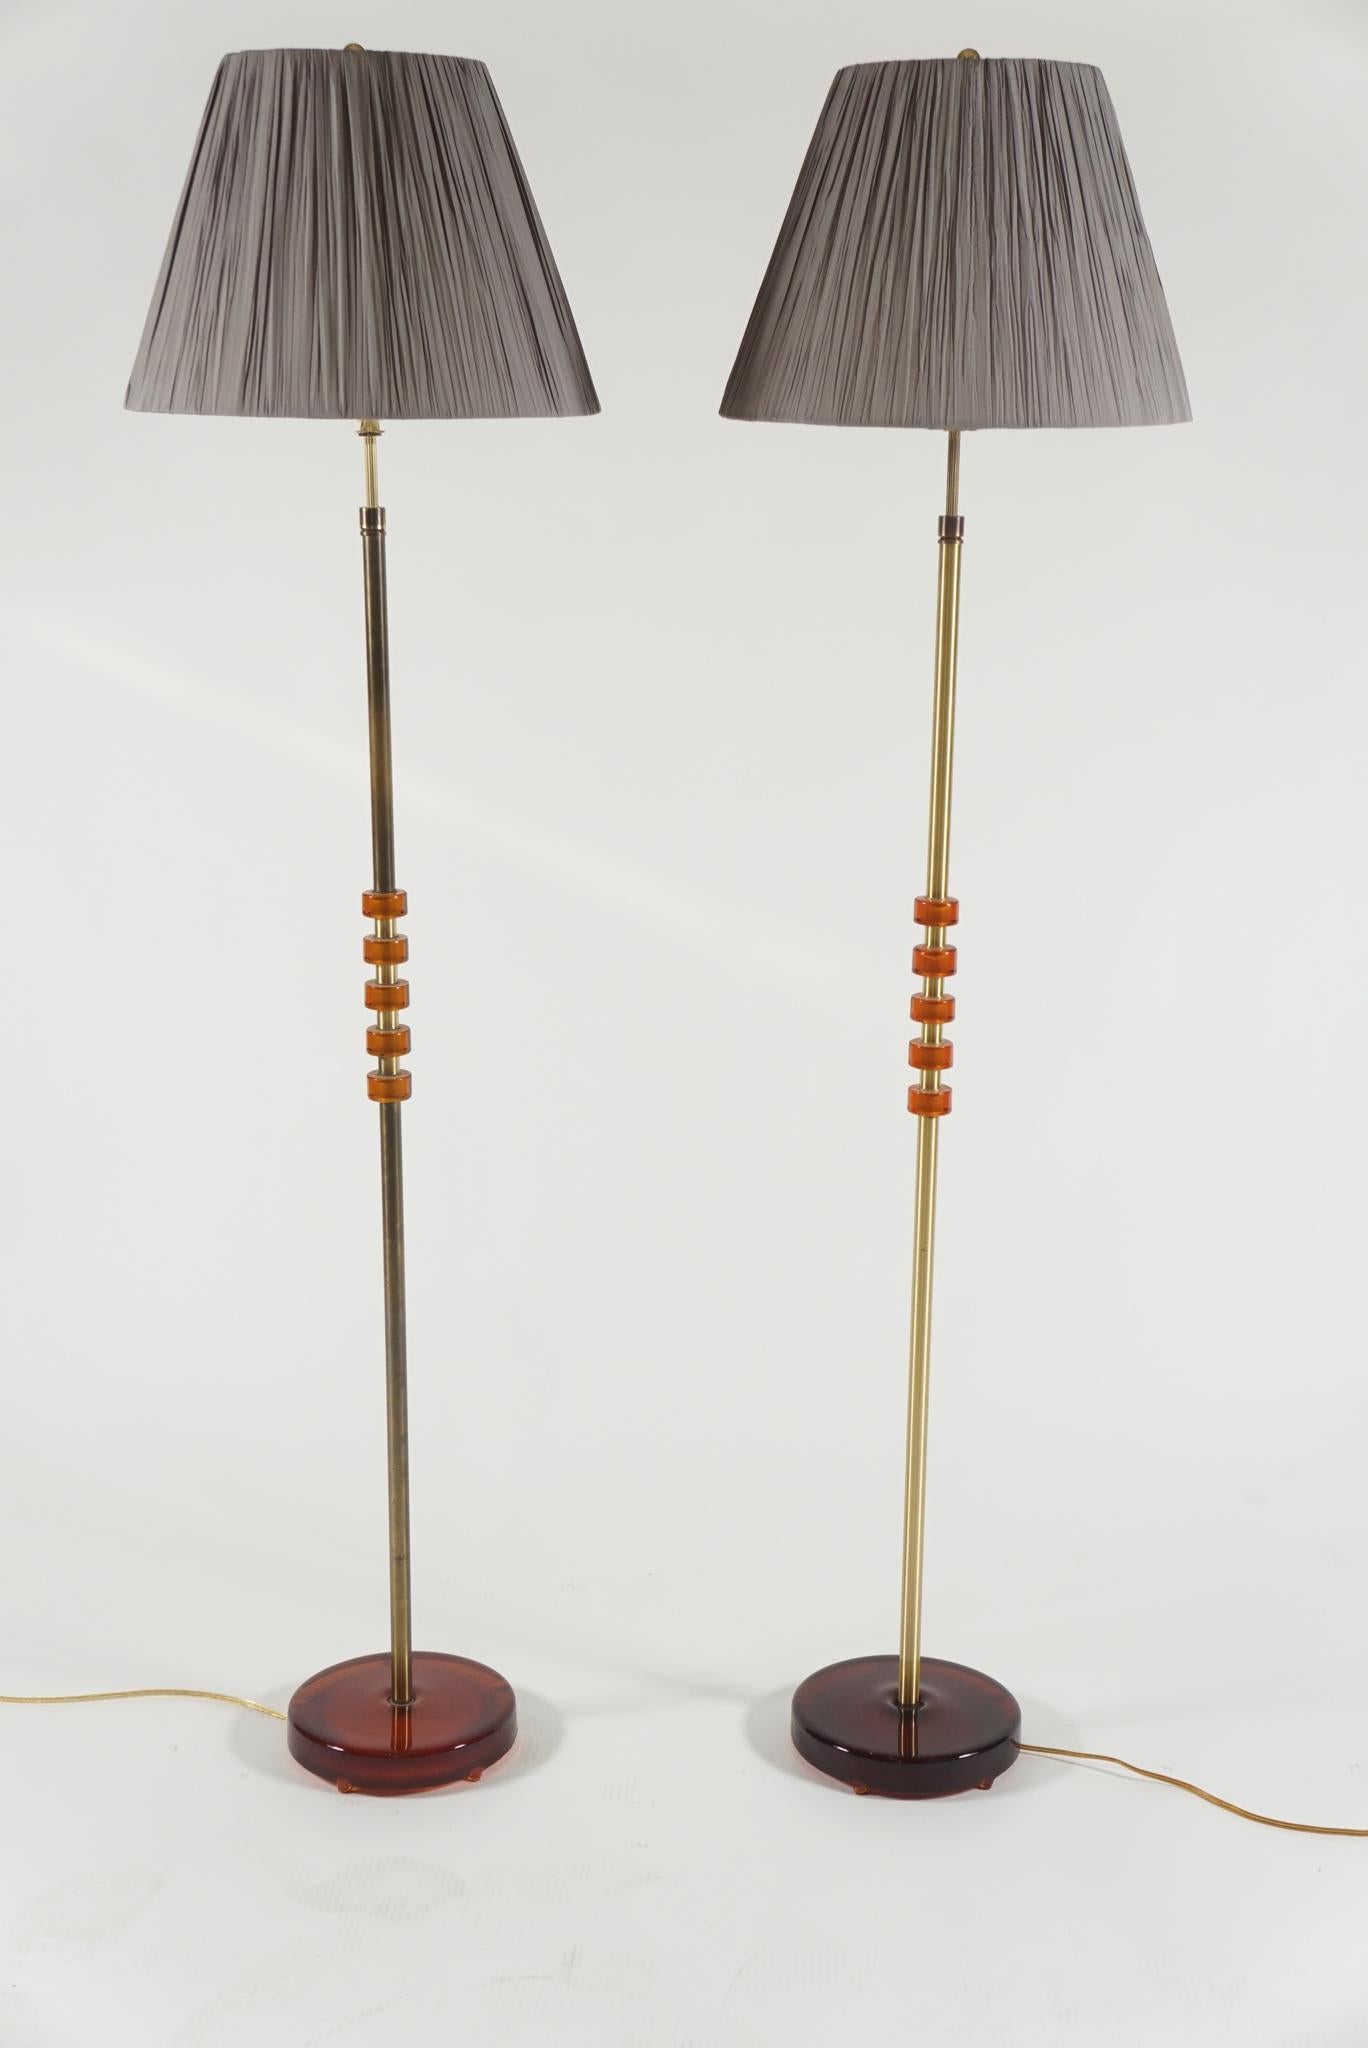 Pair of stylish brass and amber glass floor lamps from Orrefors of Sweden by Carl Fagerlund, circa 1950s
The base being glass also.